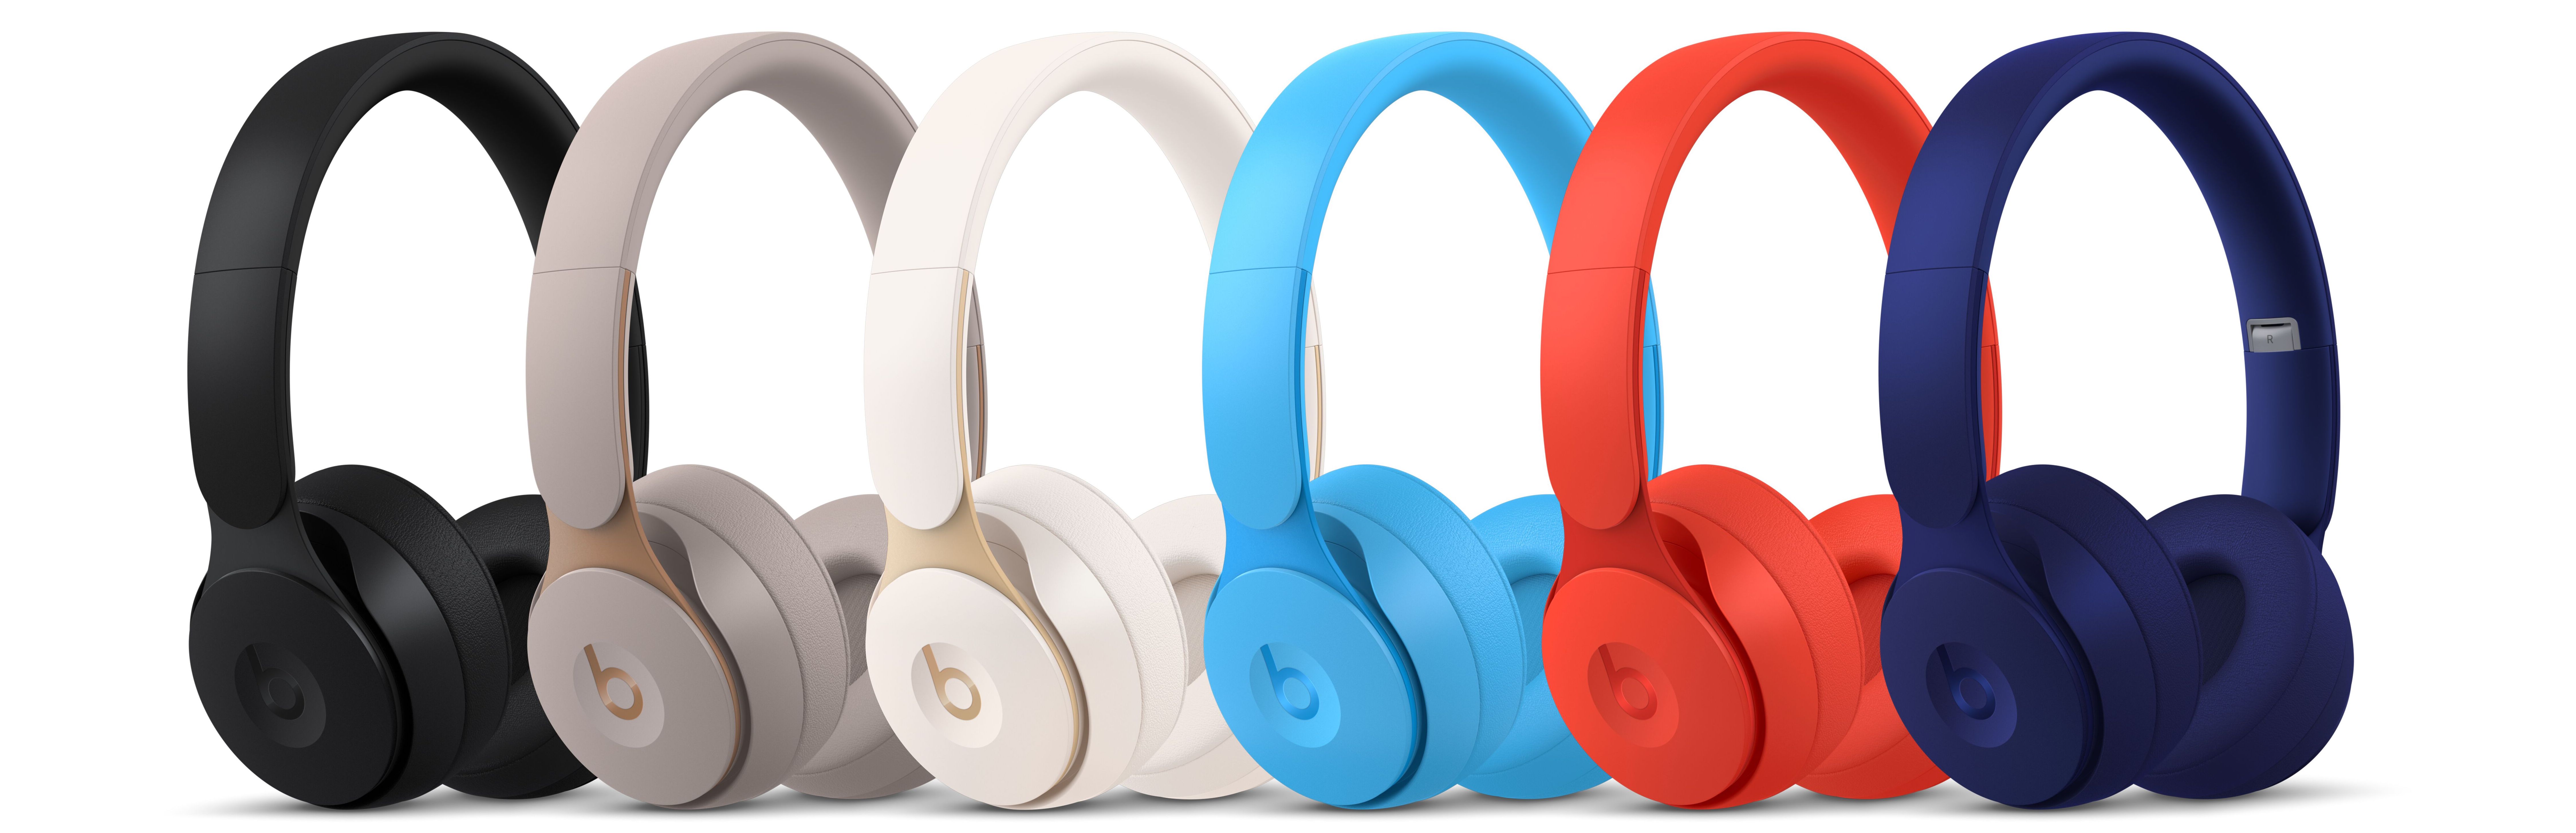 Beats Pro debut Pure ANC, Transparency, fold-to-power and Apple H1 pre-order $299 - 9to5Mac